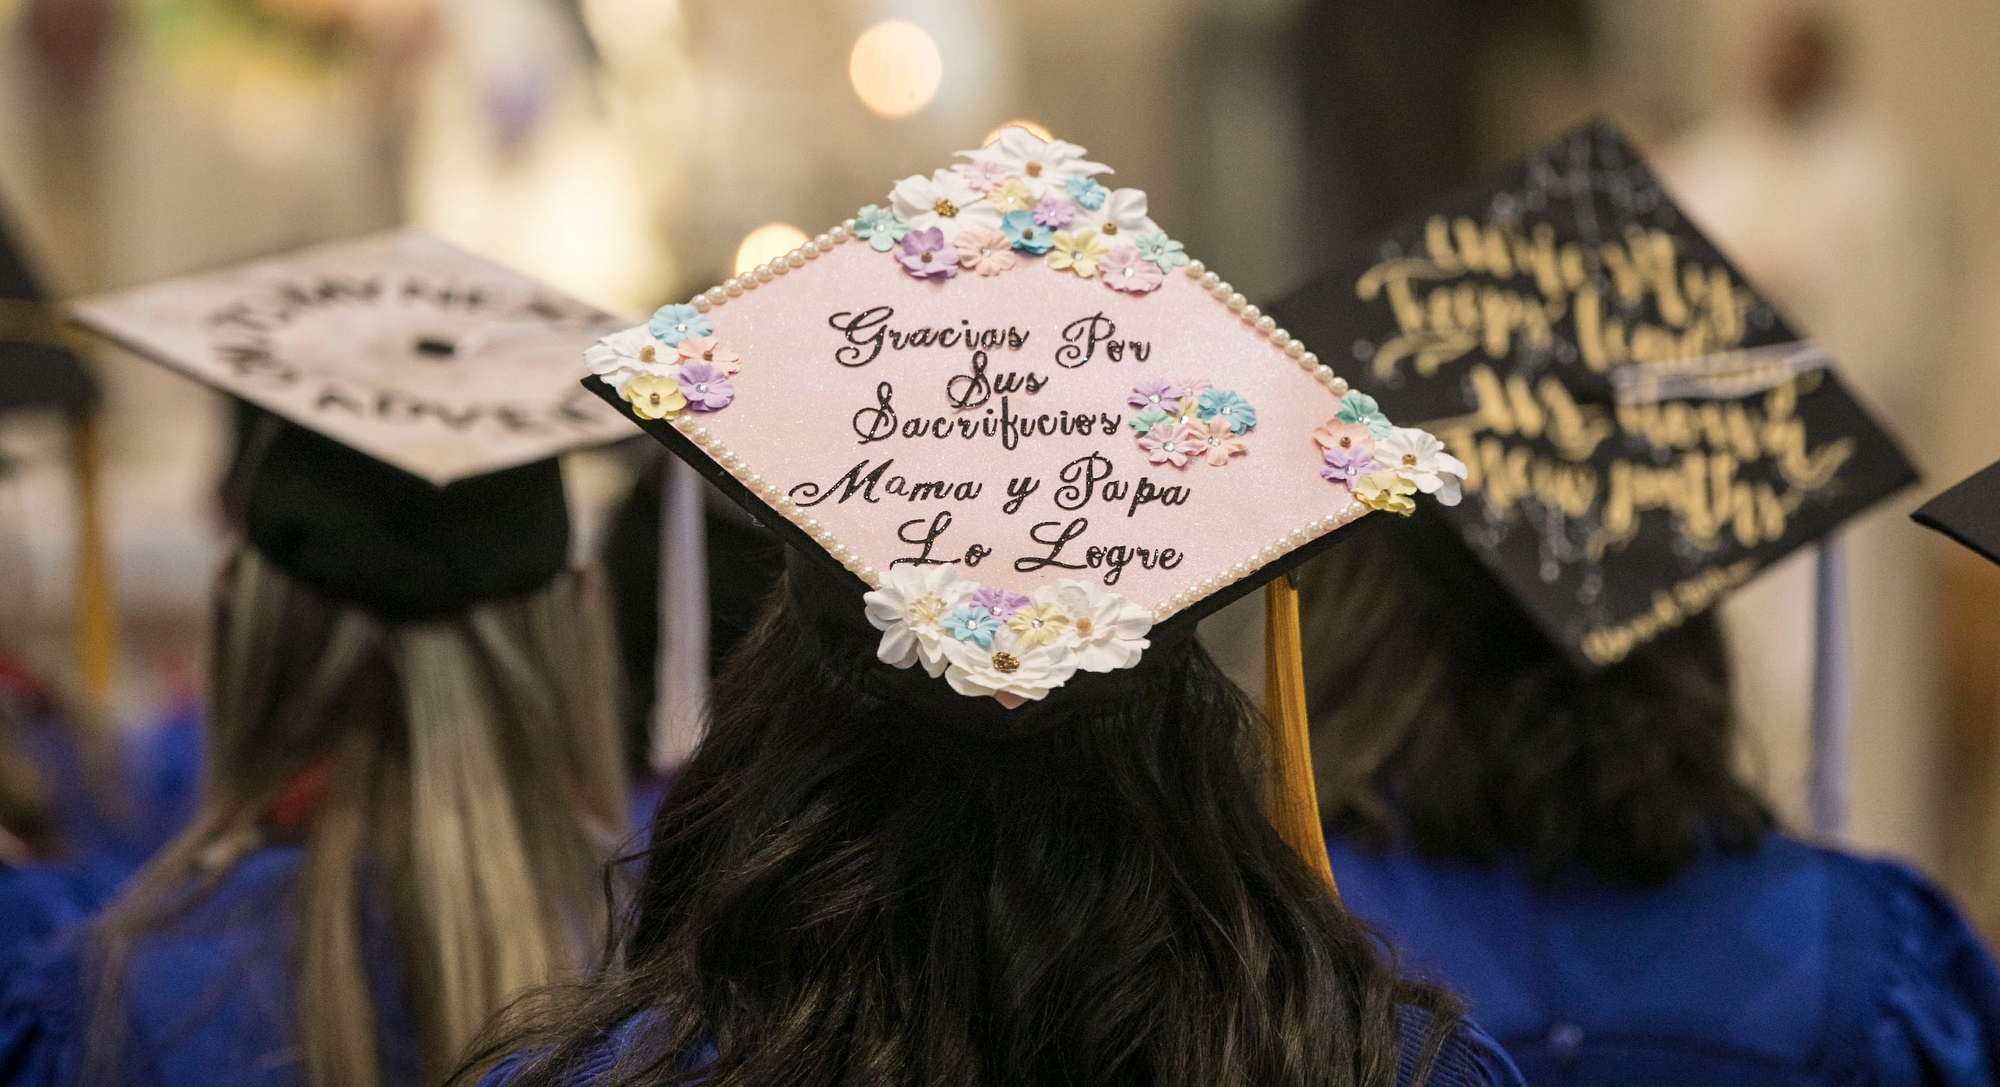  Students wearing decorated mortar boards gather with their fellow students, friends and family members inside the St. Vincent de Paul Parish Church for the annual Baccalaureate Mass. (DePaul University/Jamie Moncrief)